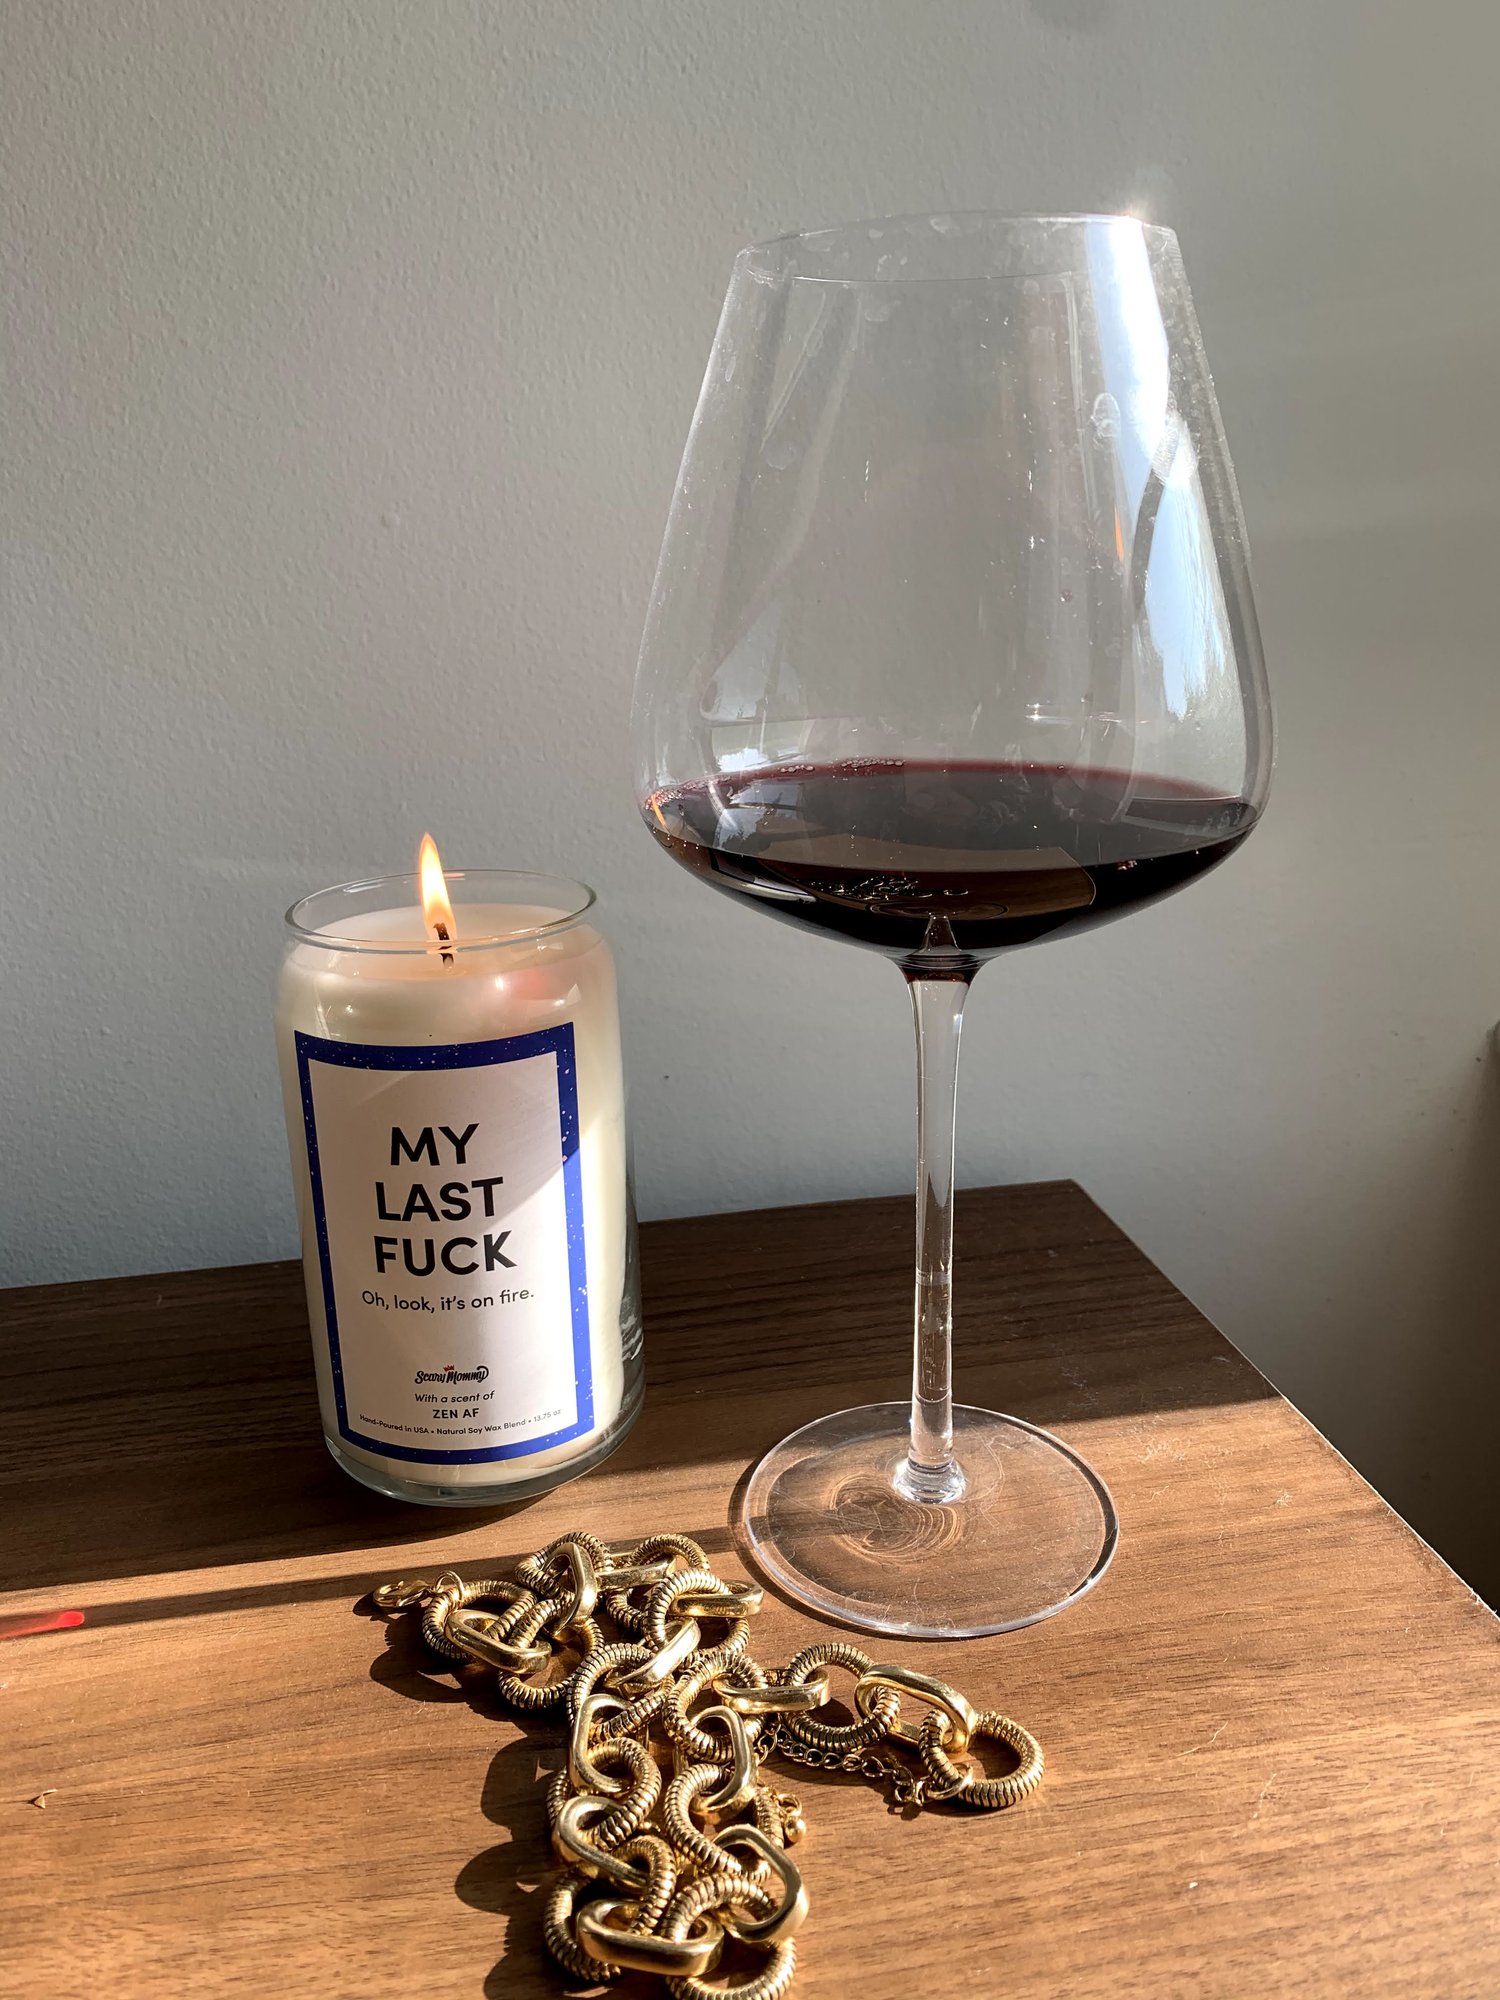 The Perfect Red Wine Glass — Good Trouble